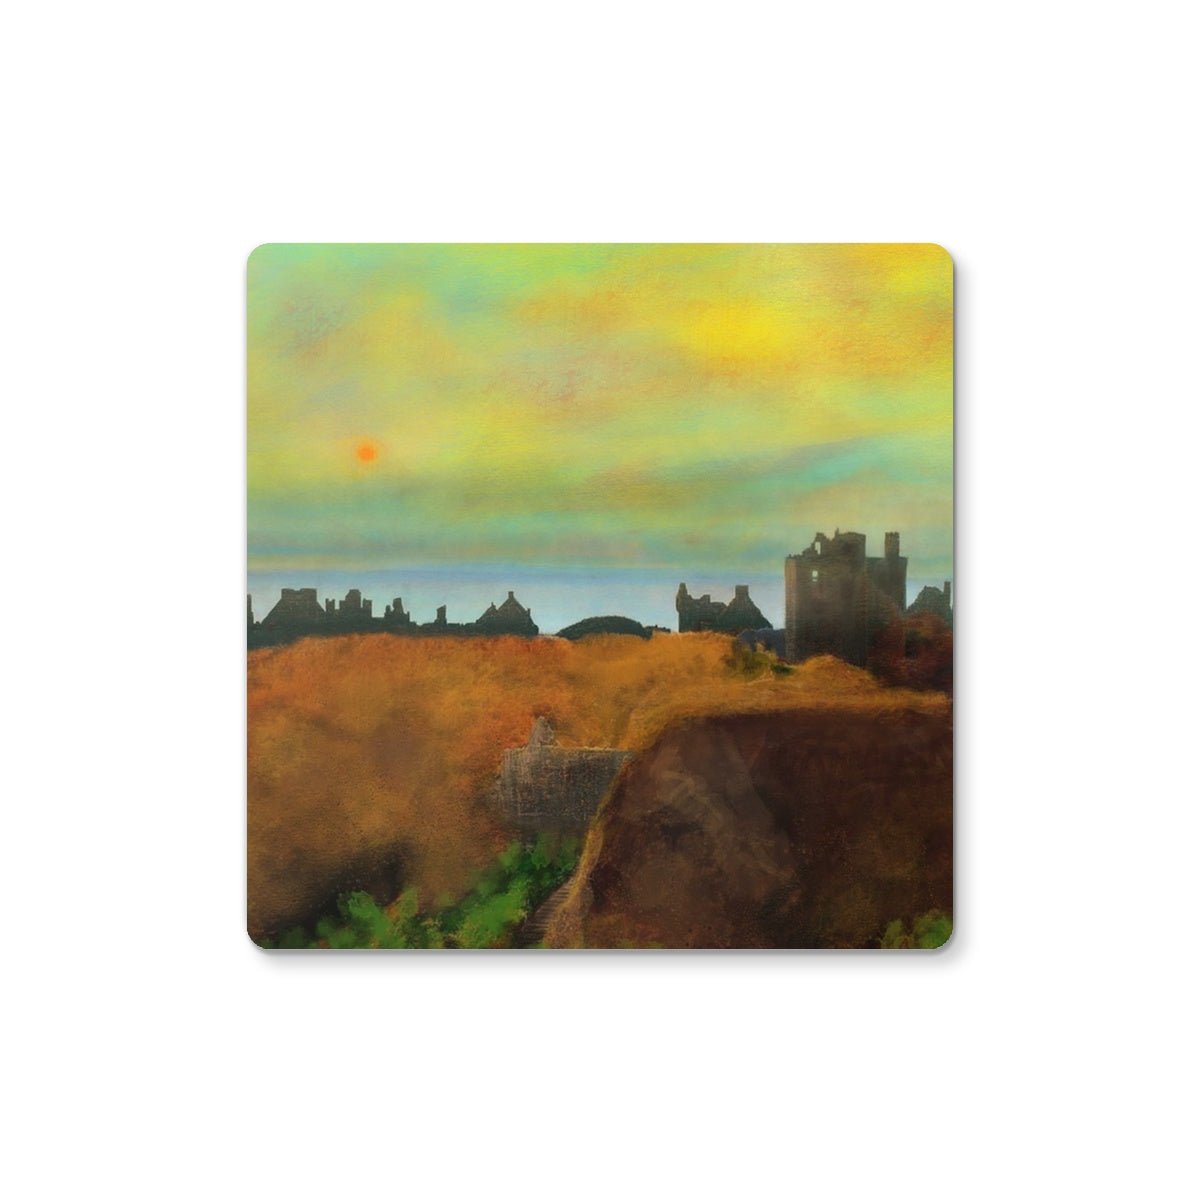 Dunnottar Castle Art Gifts Coaster-Coasters-Scottish Castles Art Gallery-2 Coasters-Paintings, Prints, Homeware, Art Gifts From Scotland By Scottish Artist Kevin Hunter